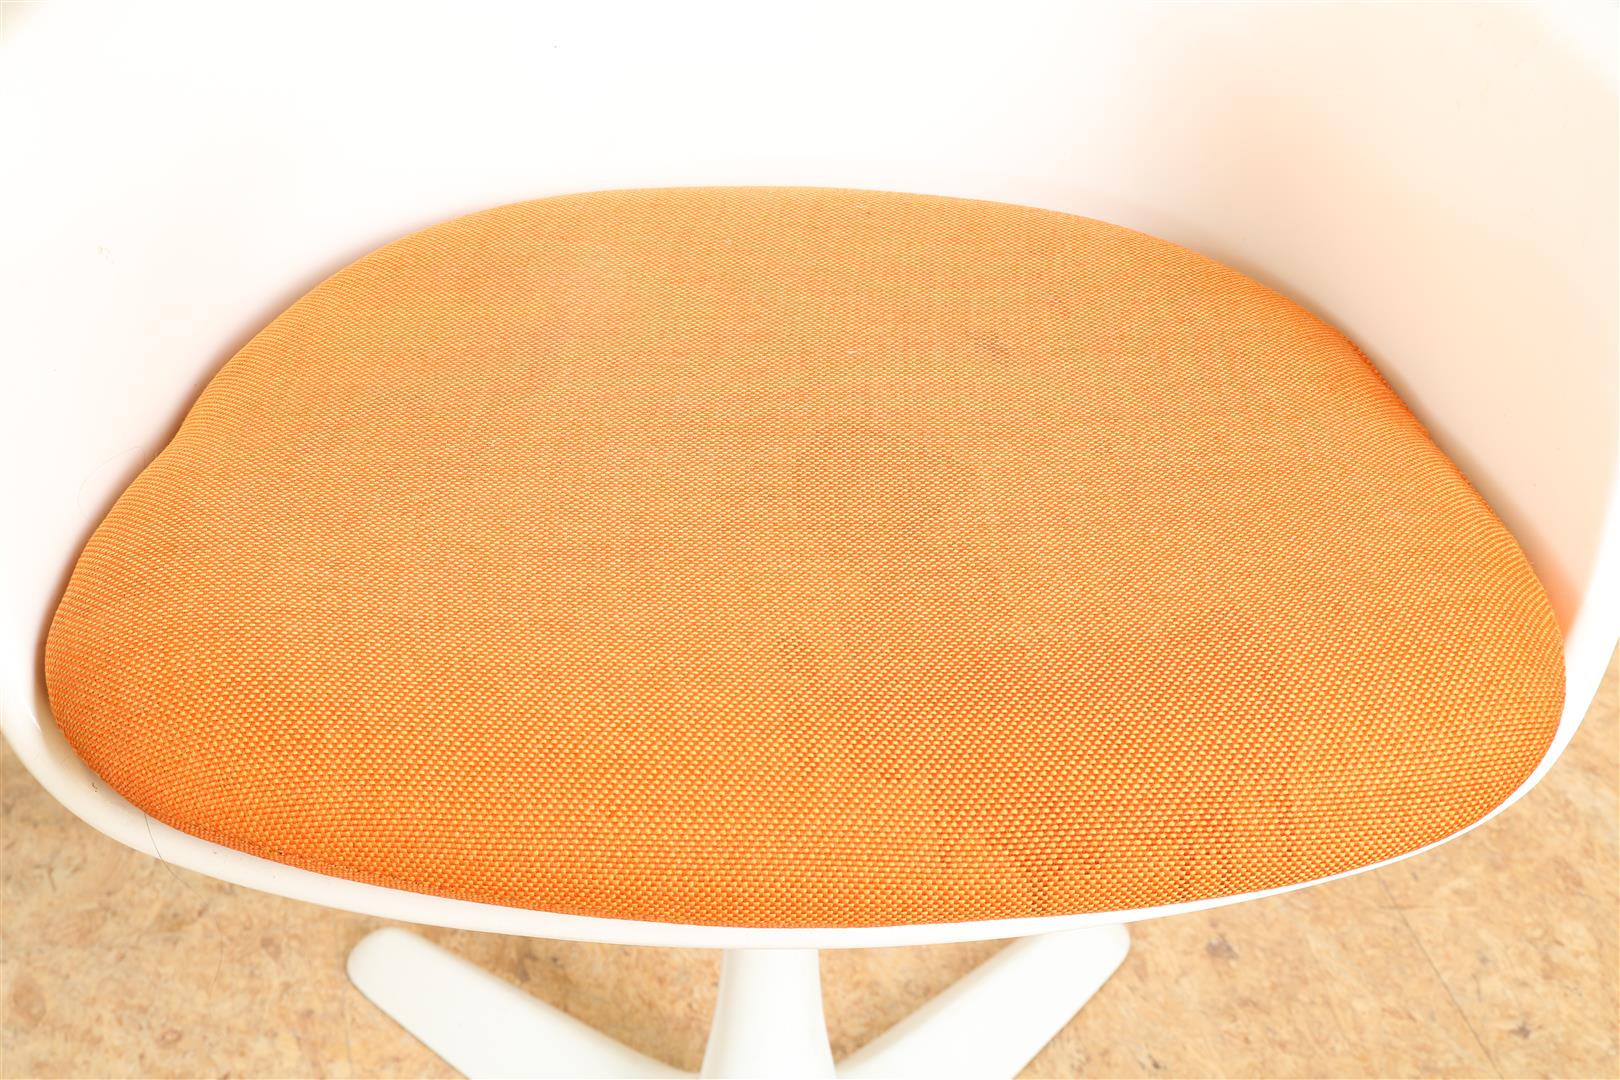 Series of 6 plastic Space Age design chairs with orange seat (user stains), marked Arkana and a - Image 4 of 9